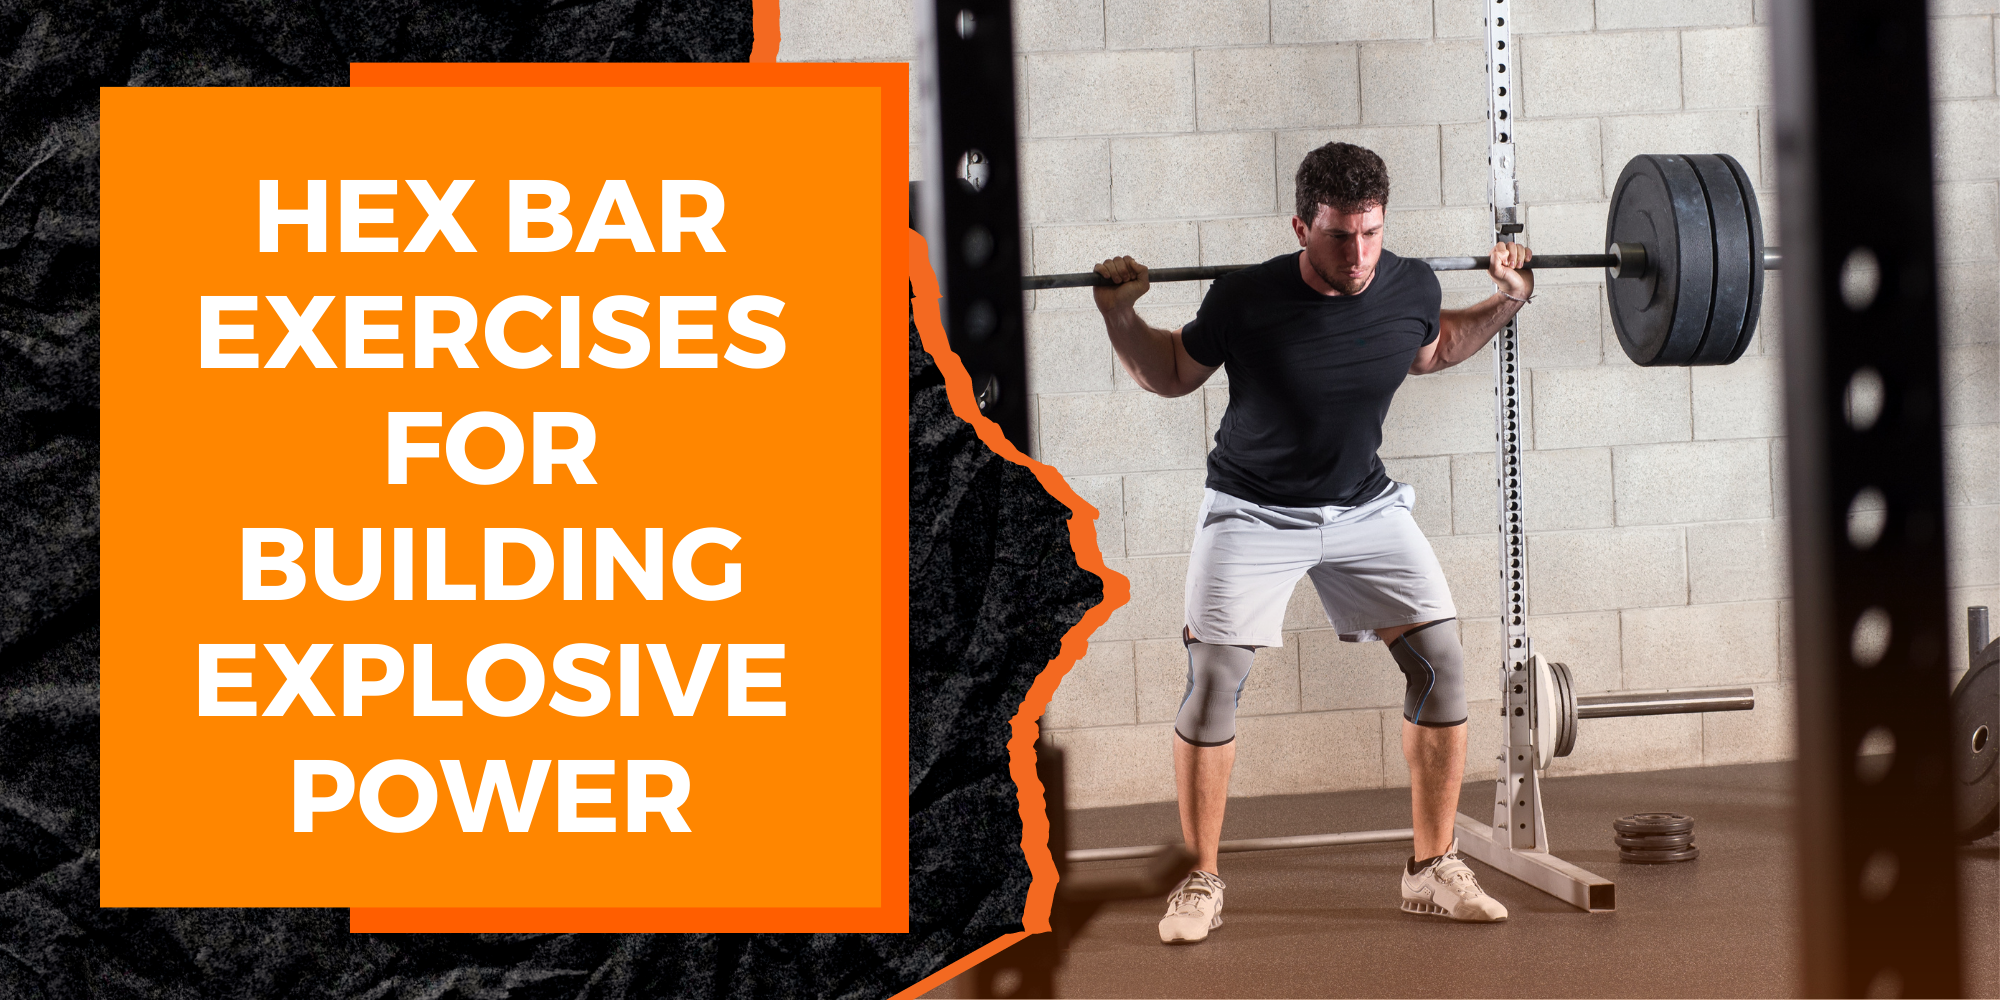 Hex Bar Exercises for Building Explosive Power